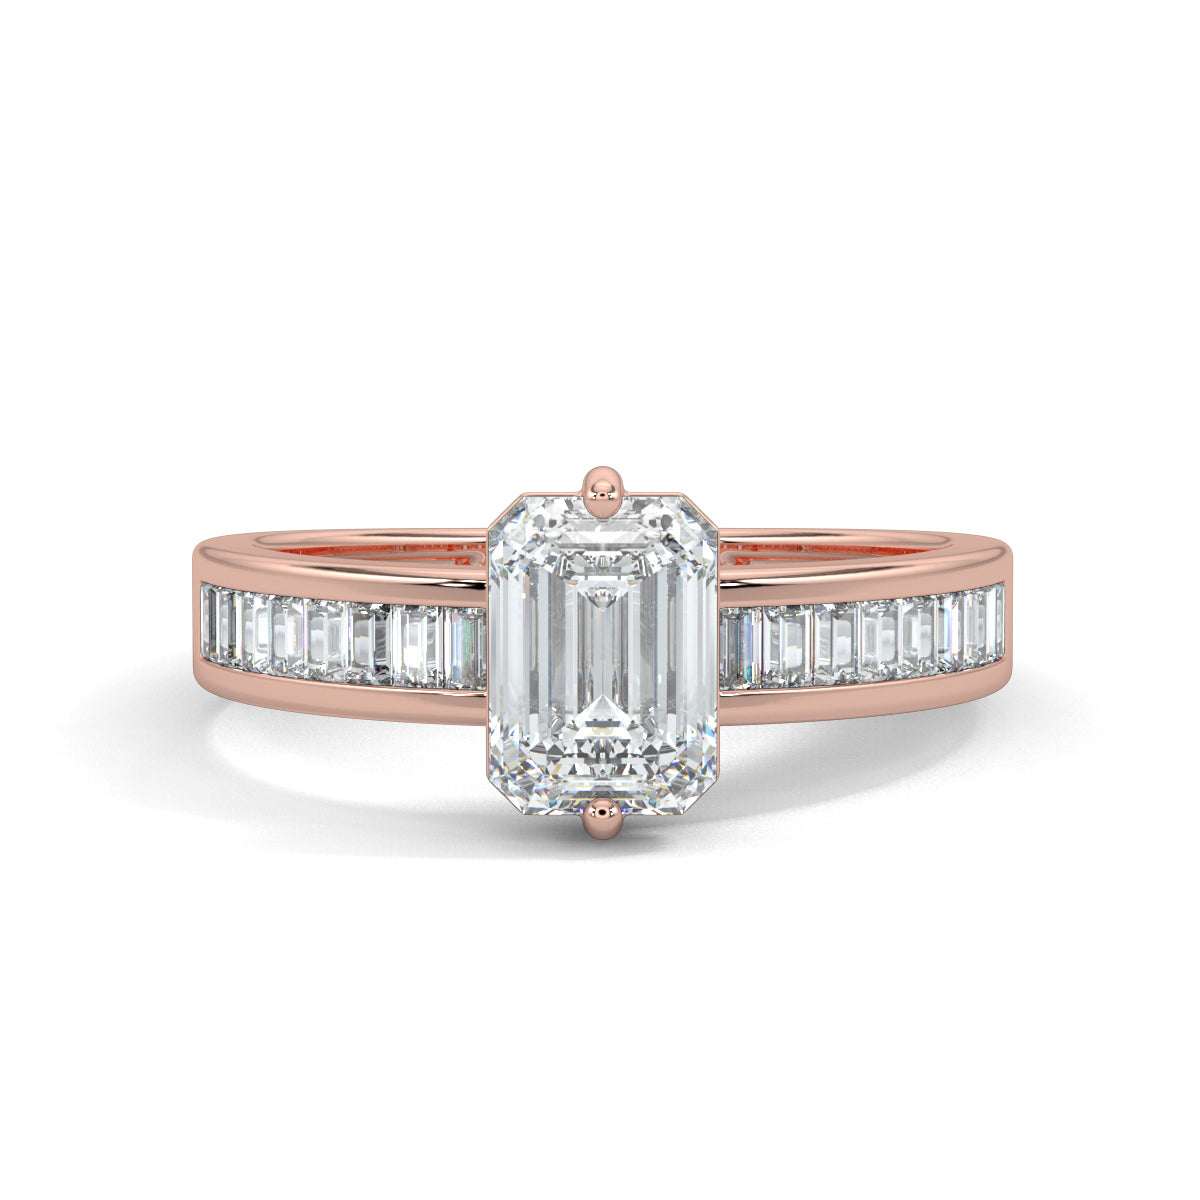 Rose Gold, Diamond Ring, Emerald solitaire diamond ring, Natural diamond ring, Lab-grown diamond ring, Solitaire diamond band ring, Baguette diamond channeling ring